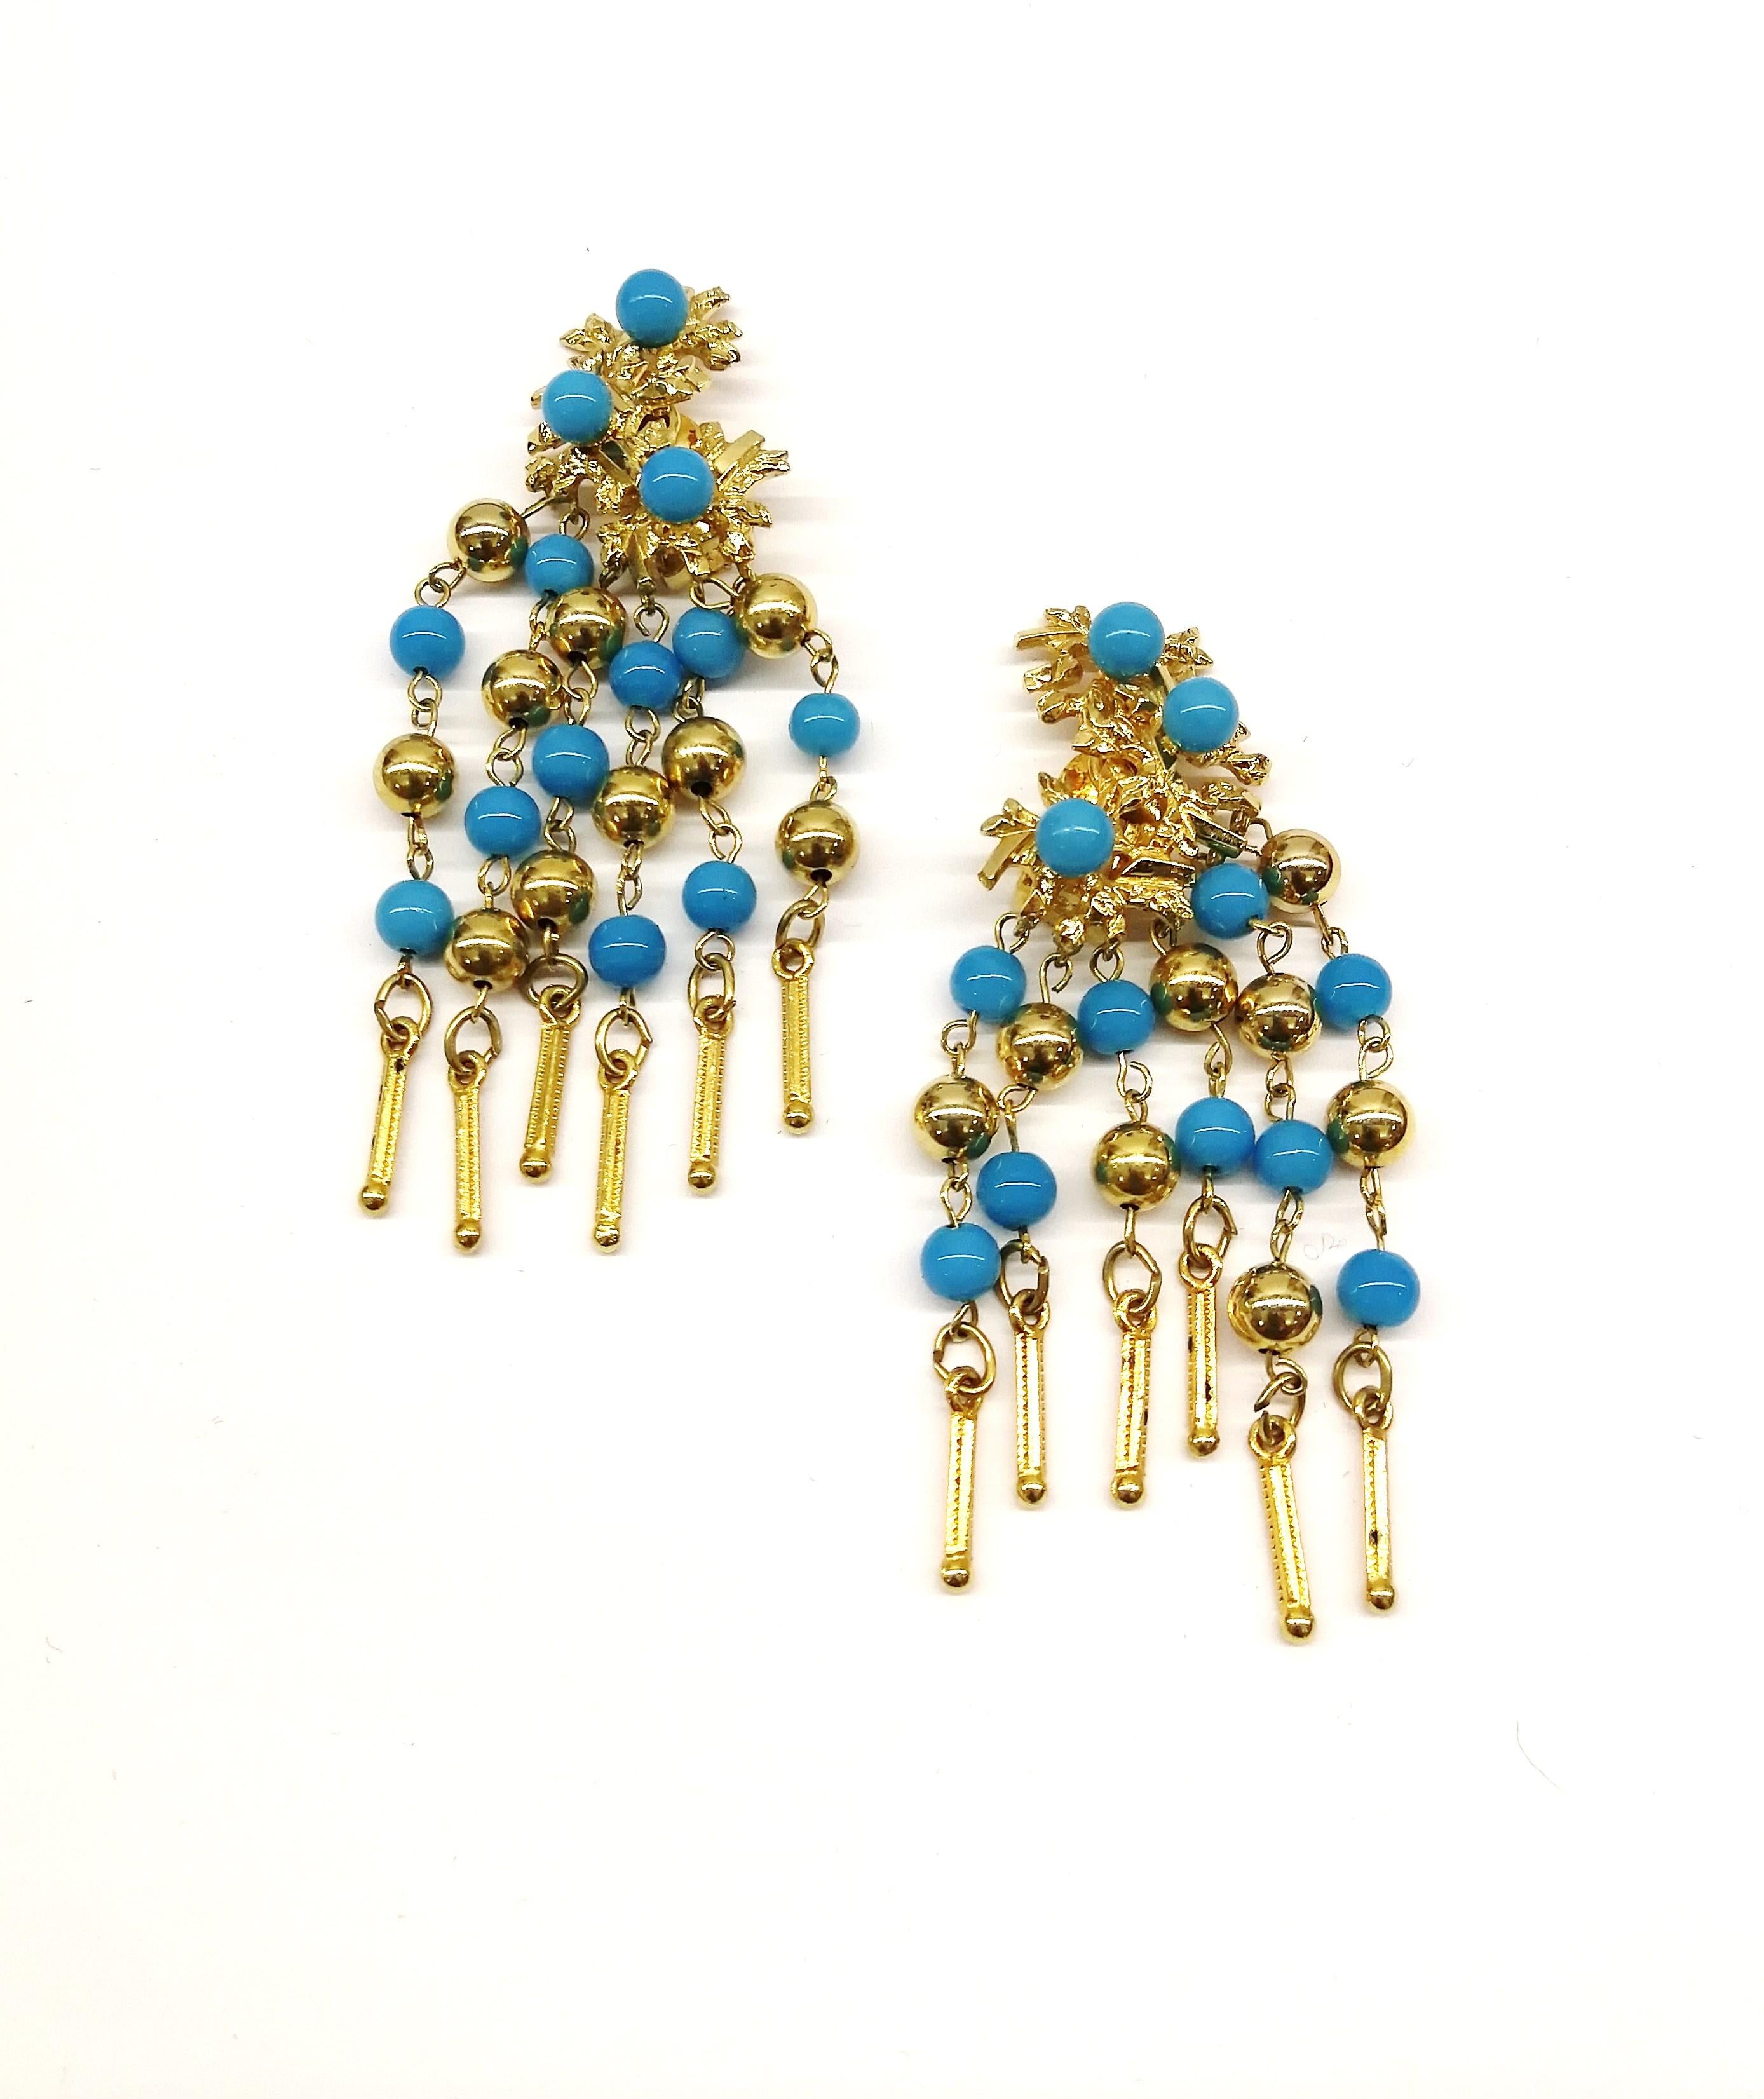 These fringed drop earrings from Christian Dior are a Summery and stylish addition to any wardrobe. With a design of abstracted gilt floral motifs on the top half of the earrings, set with round turquoise glass beads, the bottom half drops down in